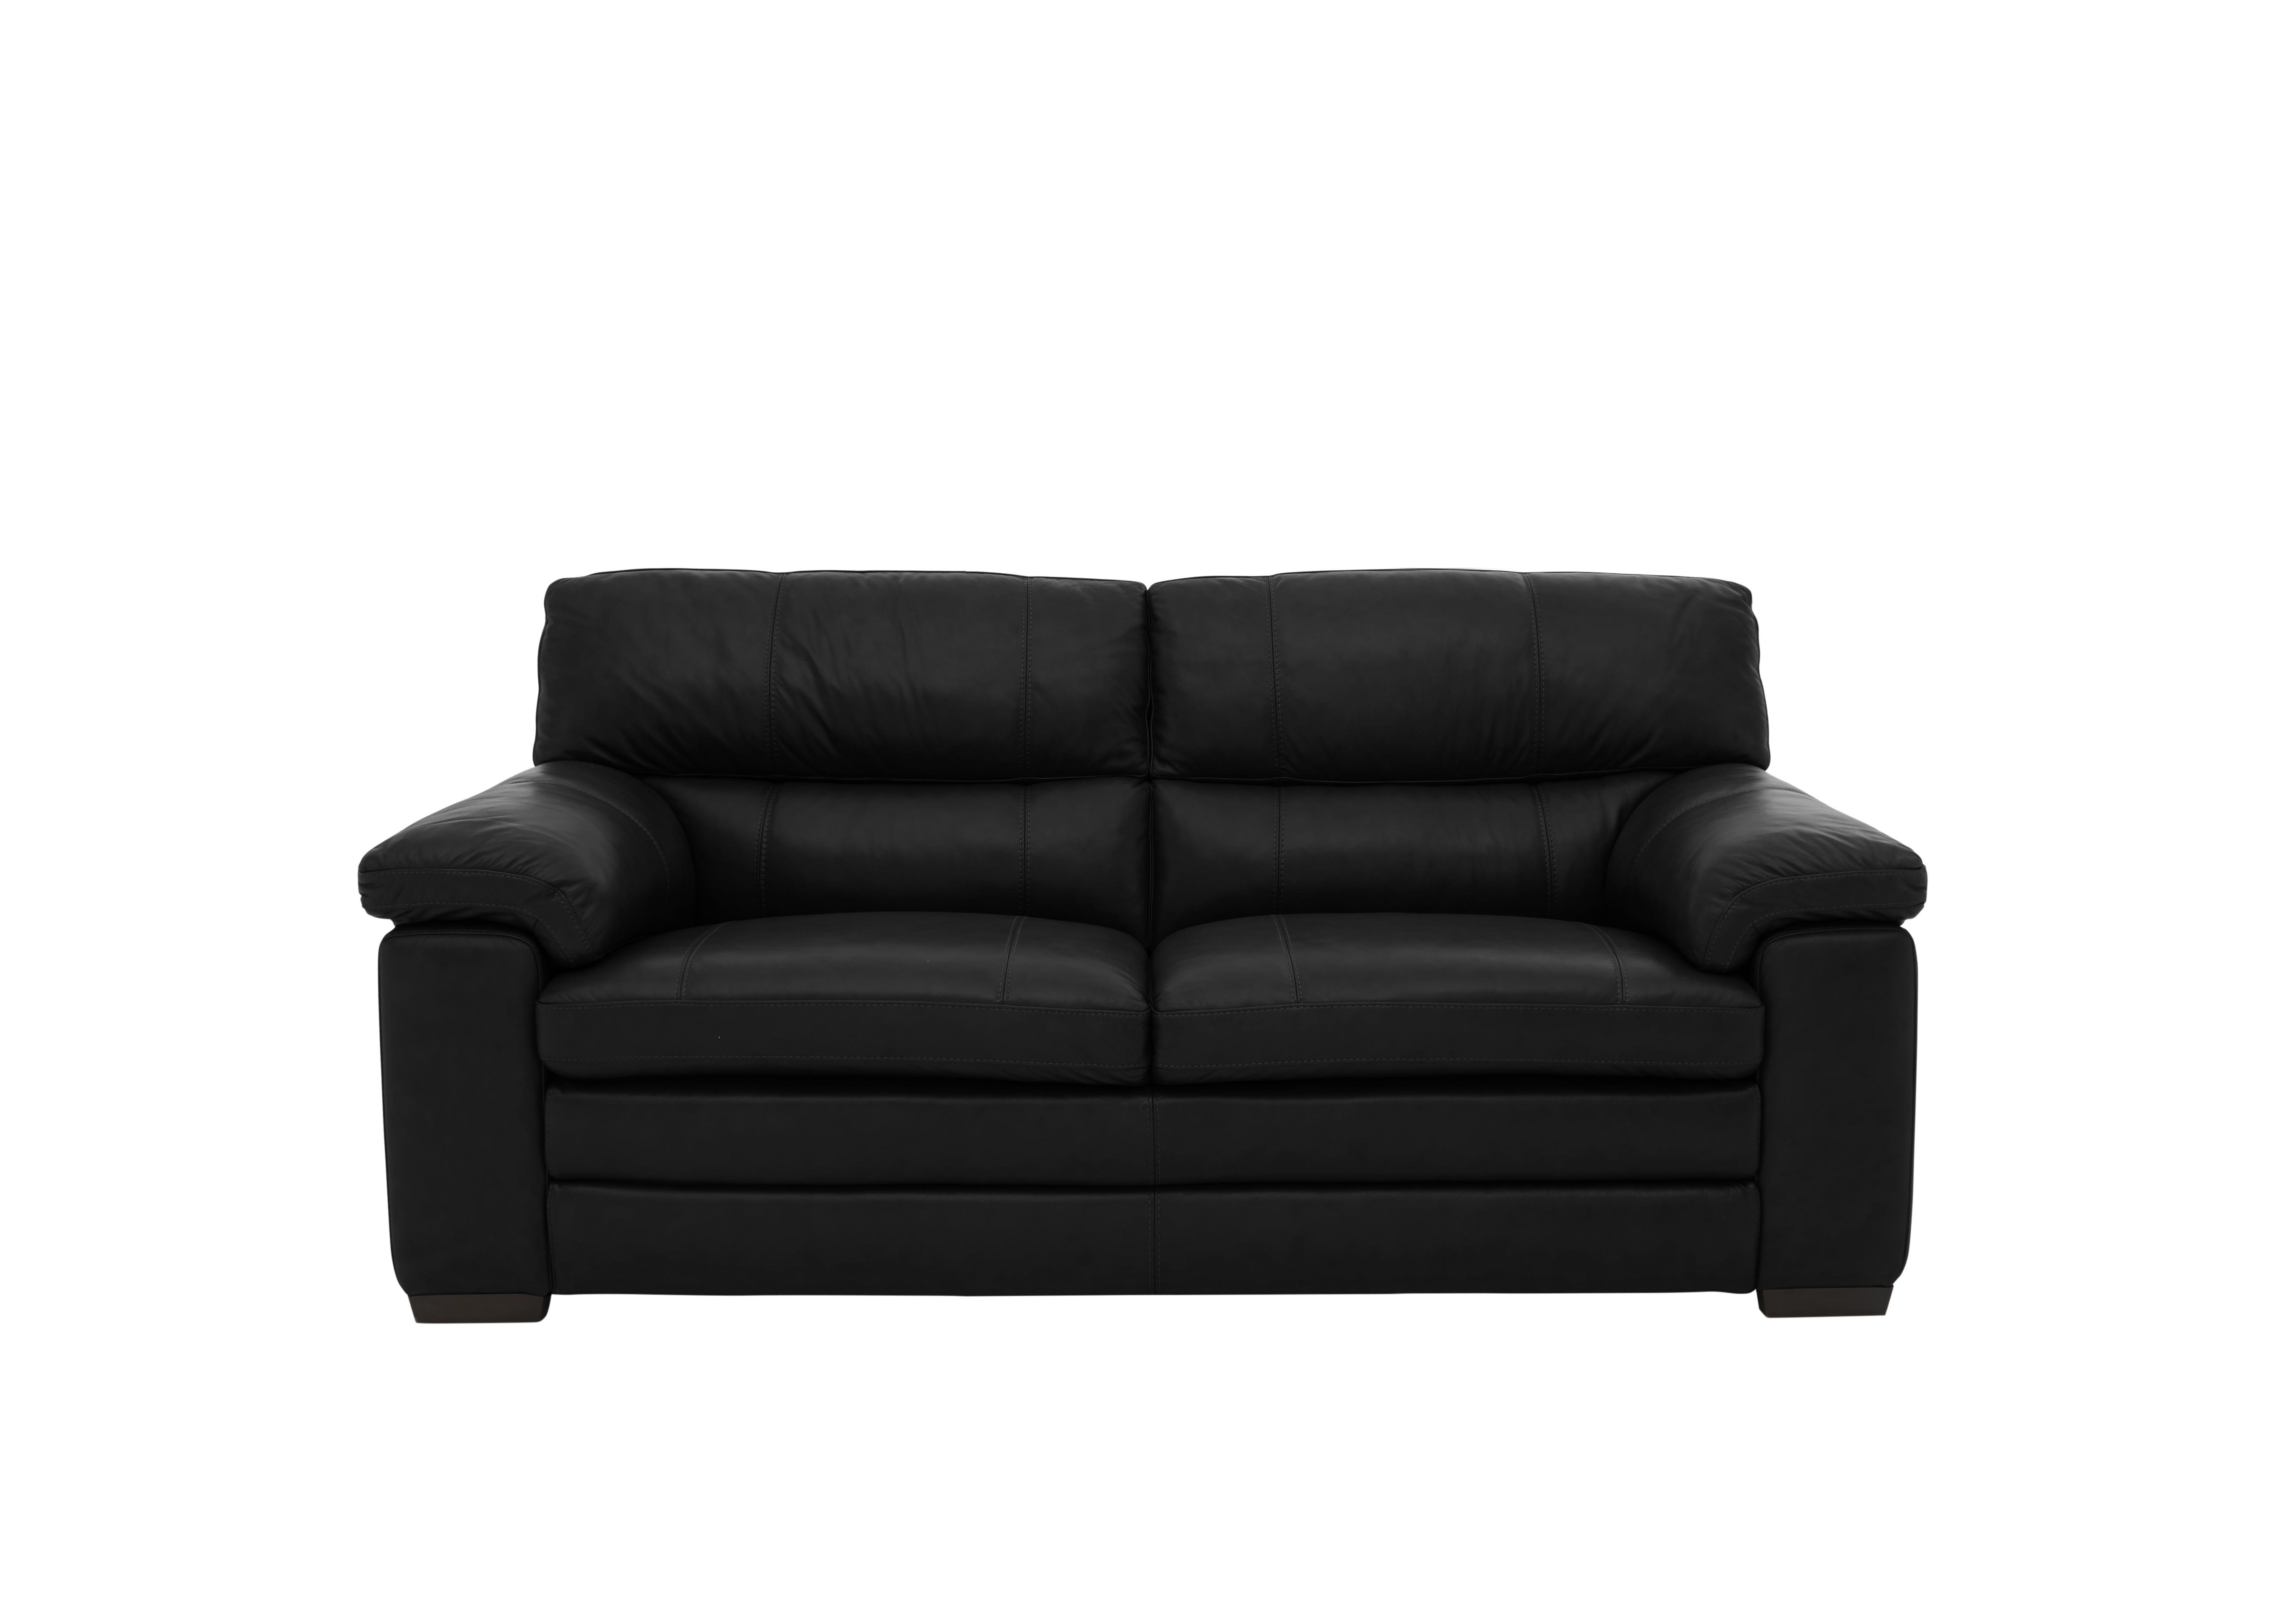 Cozee 2 Seater Pure Premium Leather Sofa in Bv-3500 Classic Black on Furniture Village